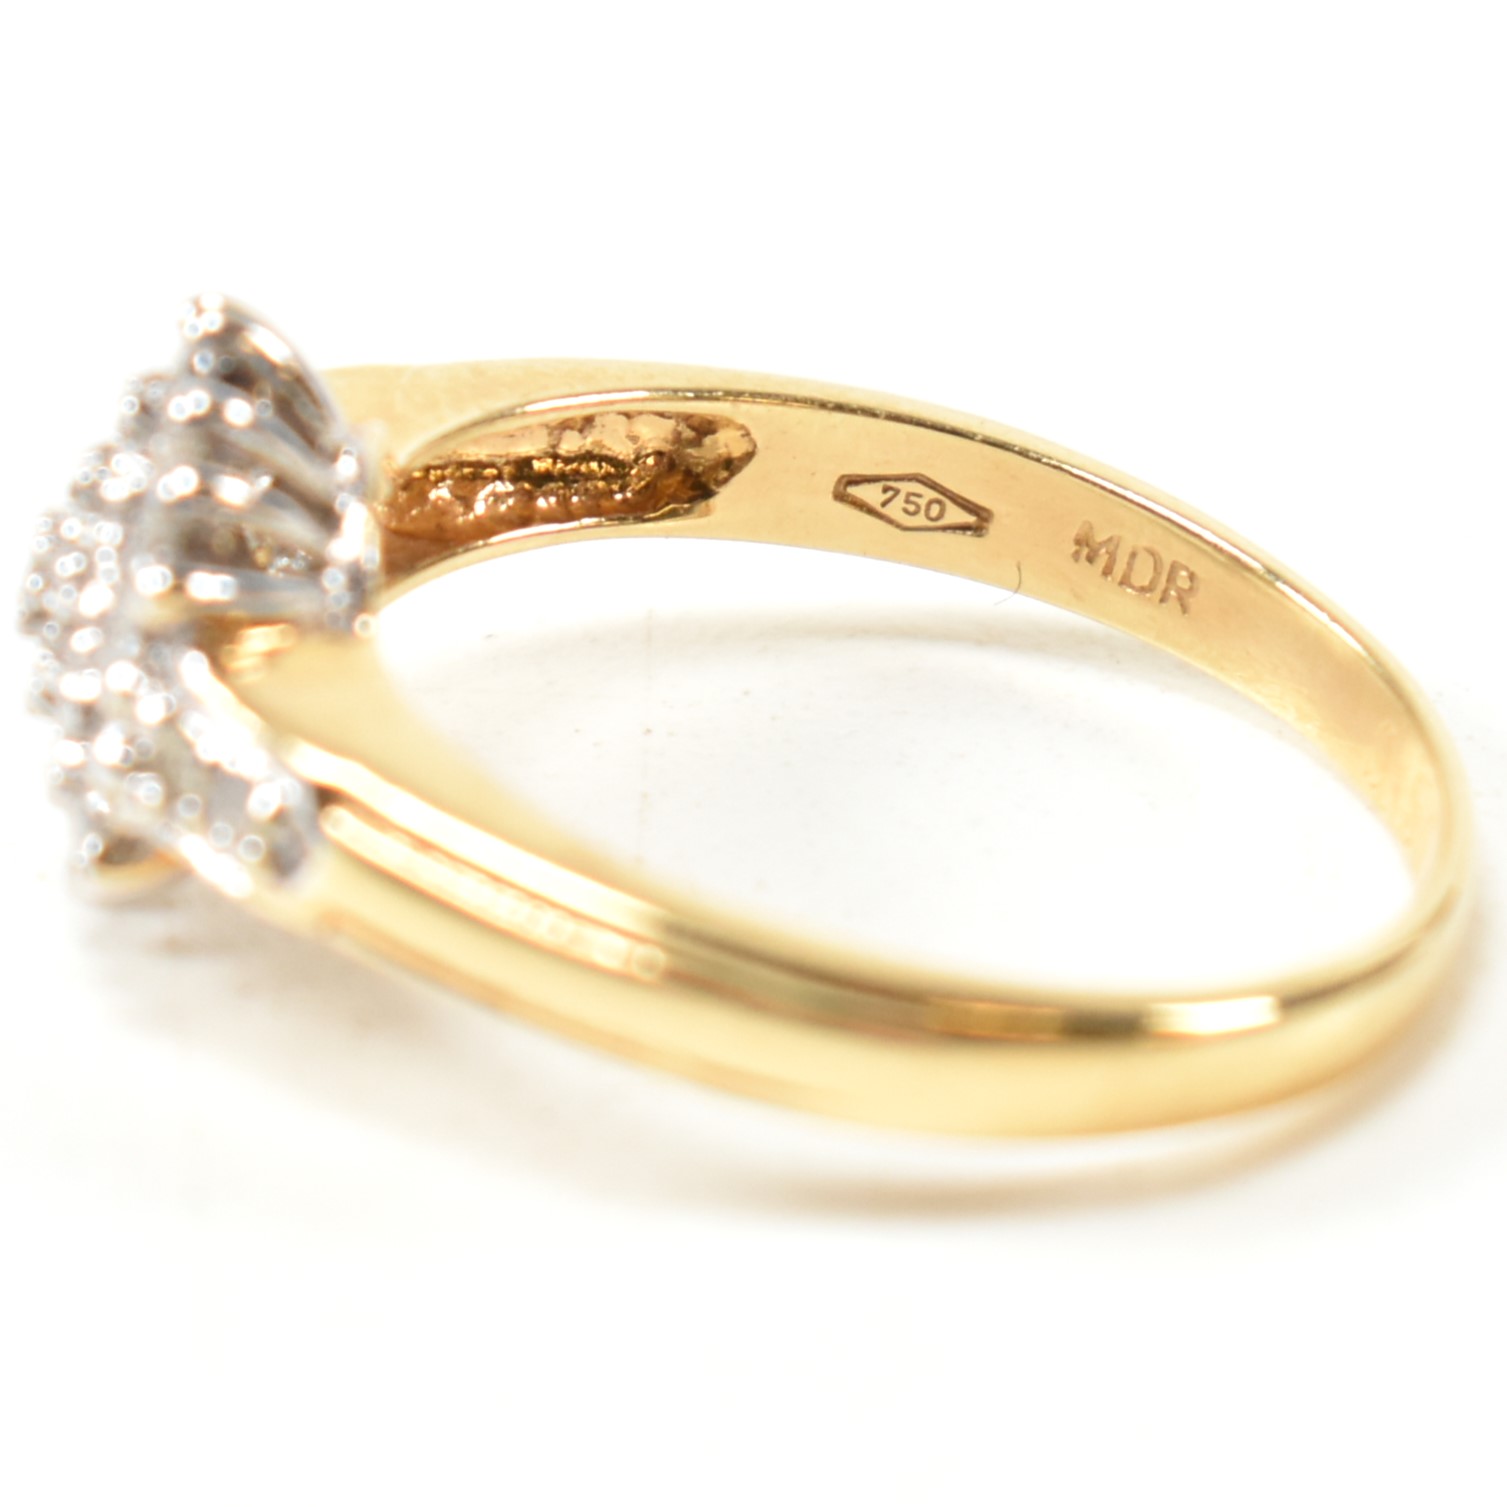 HALLMARKED 18CT GOLD & DIAMOND CLUSTER RING - Image 8 of 10